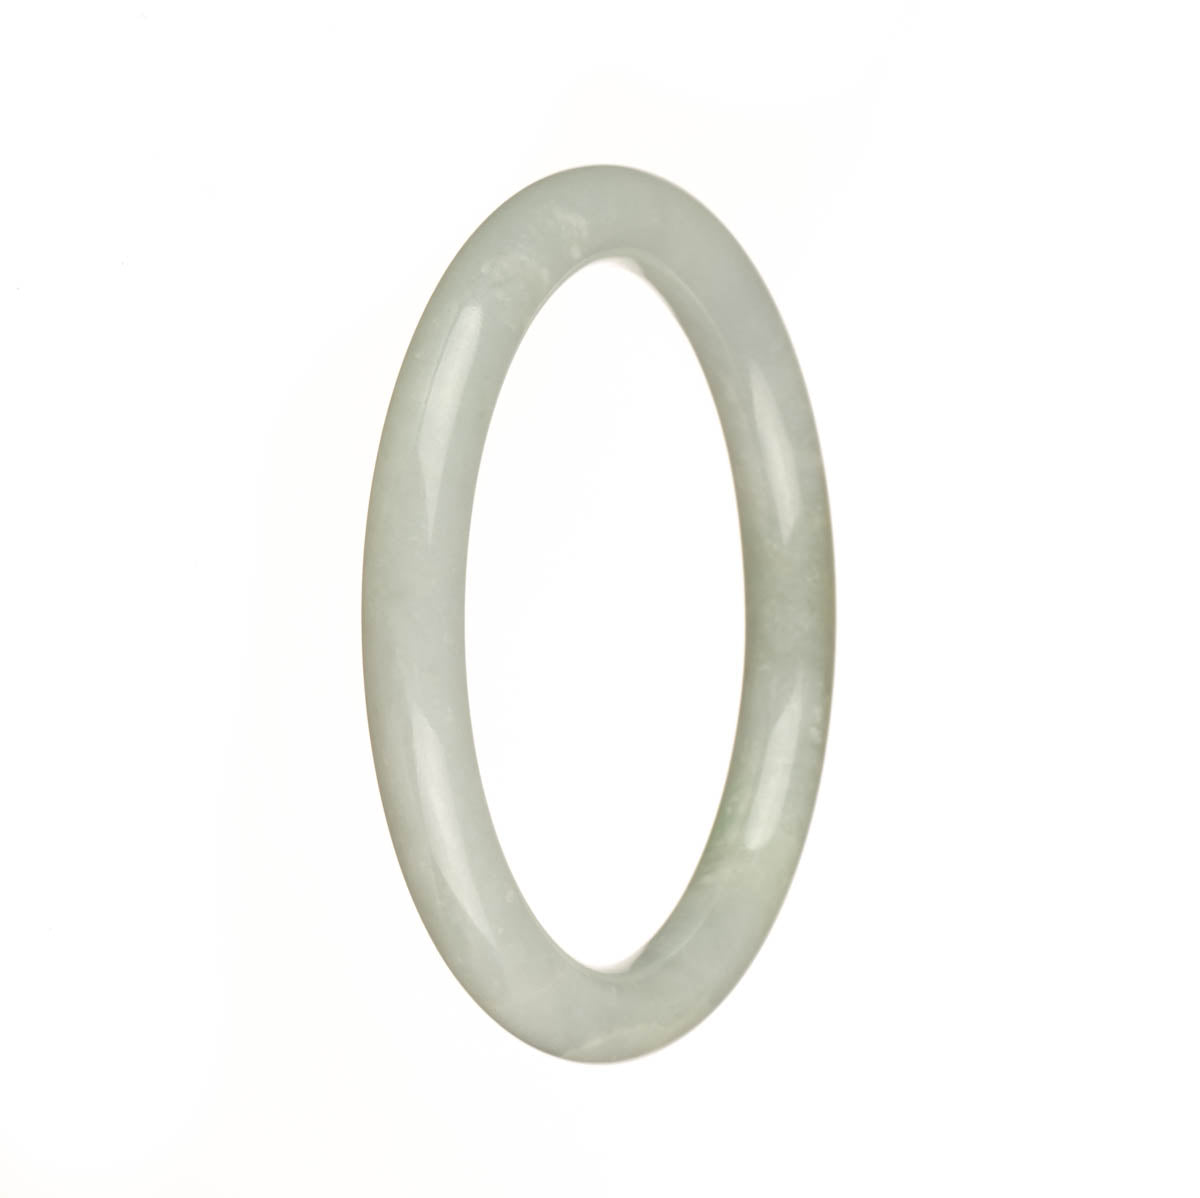 A close-up photo of a small, round white bangle bracelet made of genuine Type A Burmese Jade. The bracelet has a smooth and polished surface, and it measures 56mm in diameter. The bracelet is delicately designed and exudes elegance and sophistication.